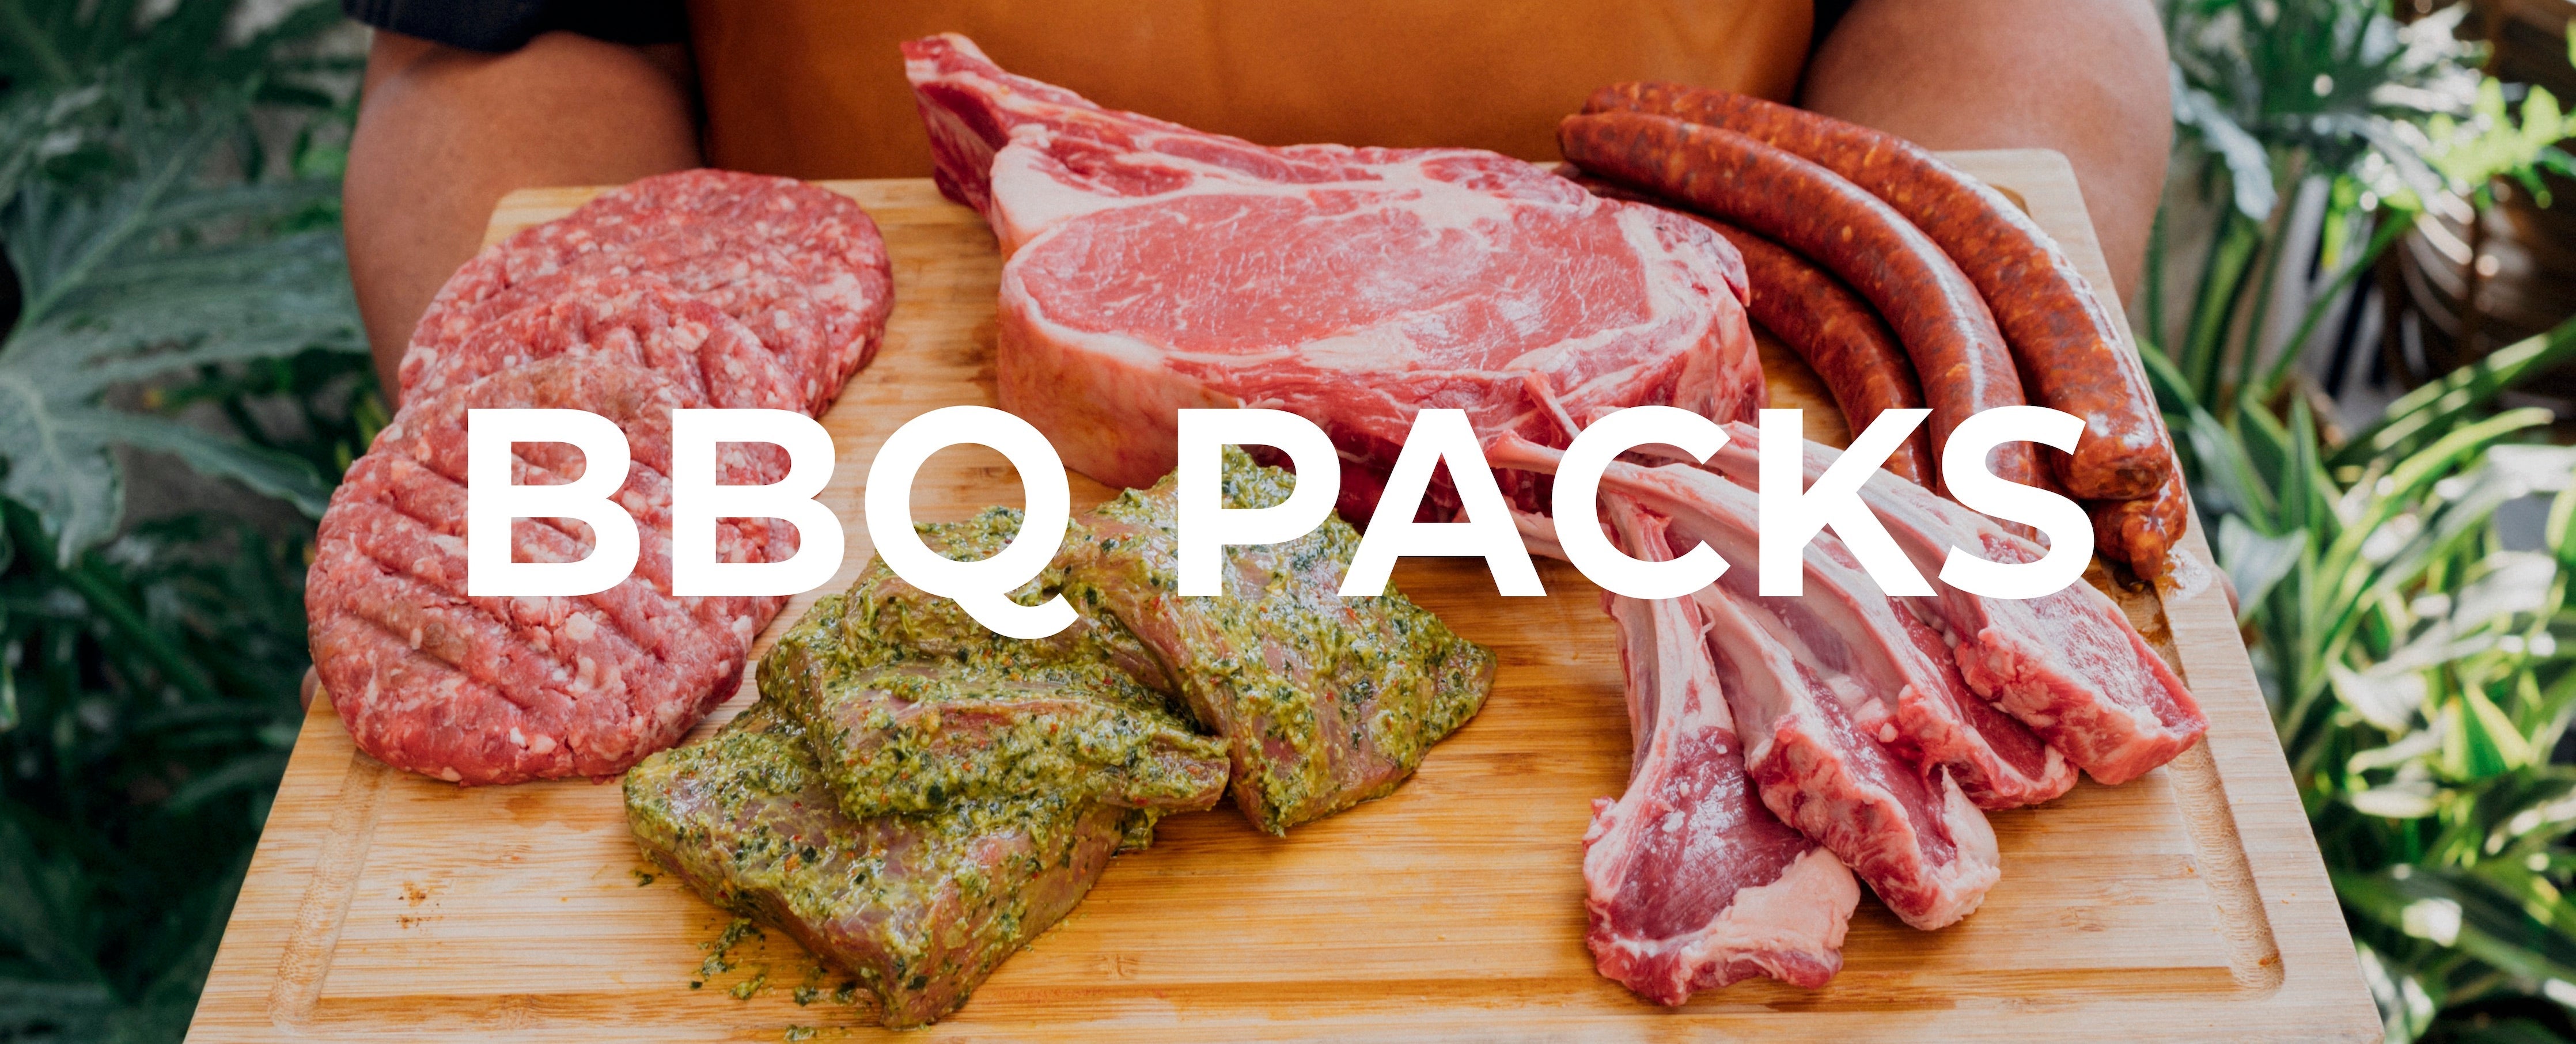 ORDER AN EASY-TO-GRILL BBQ PACK